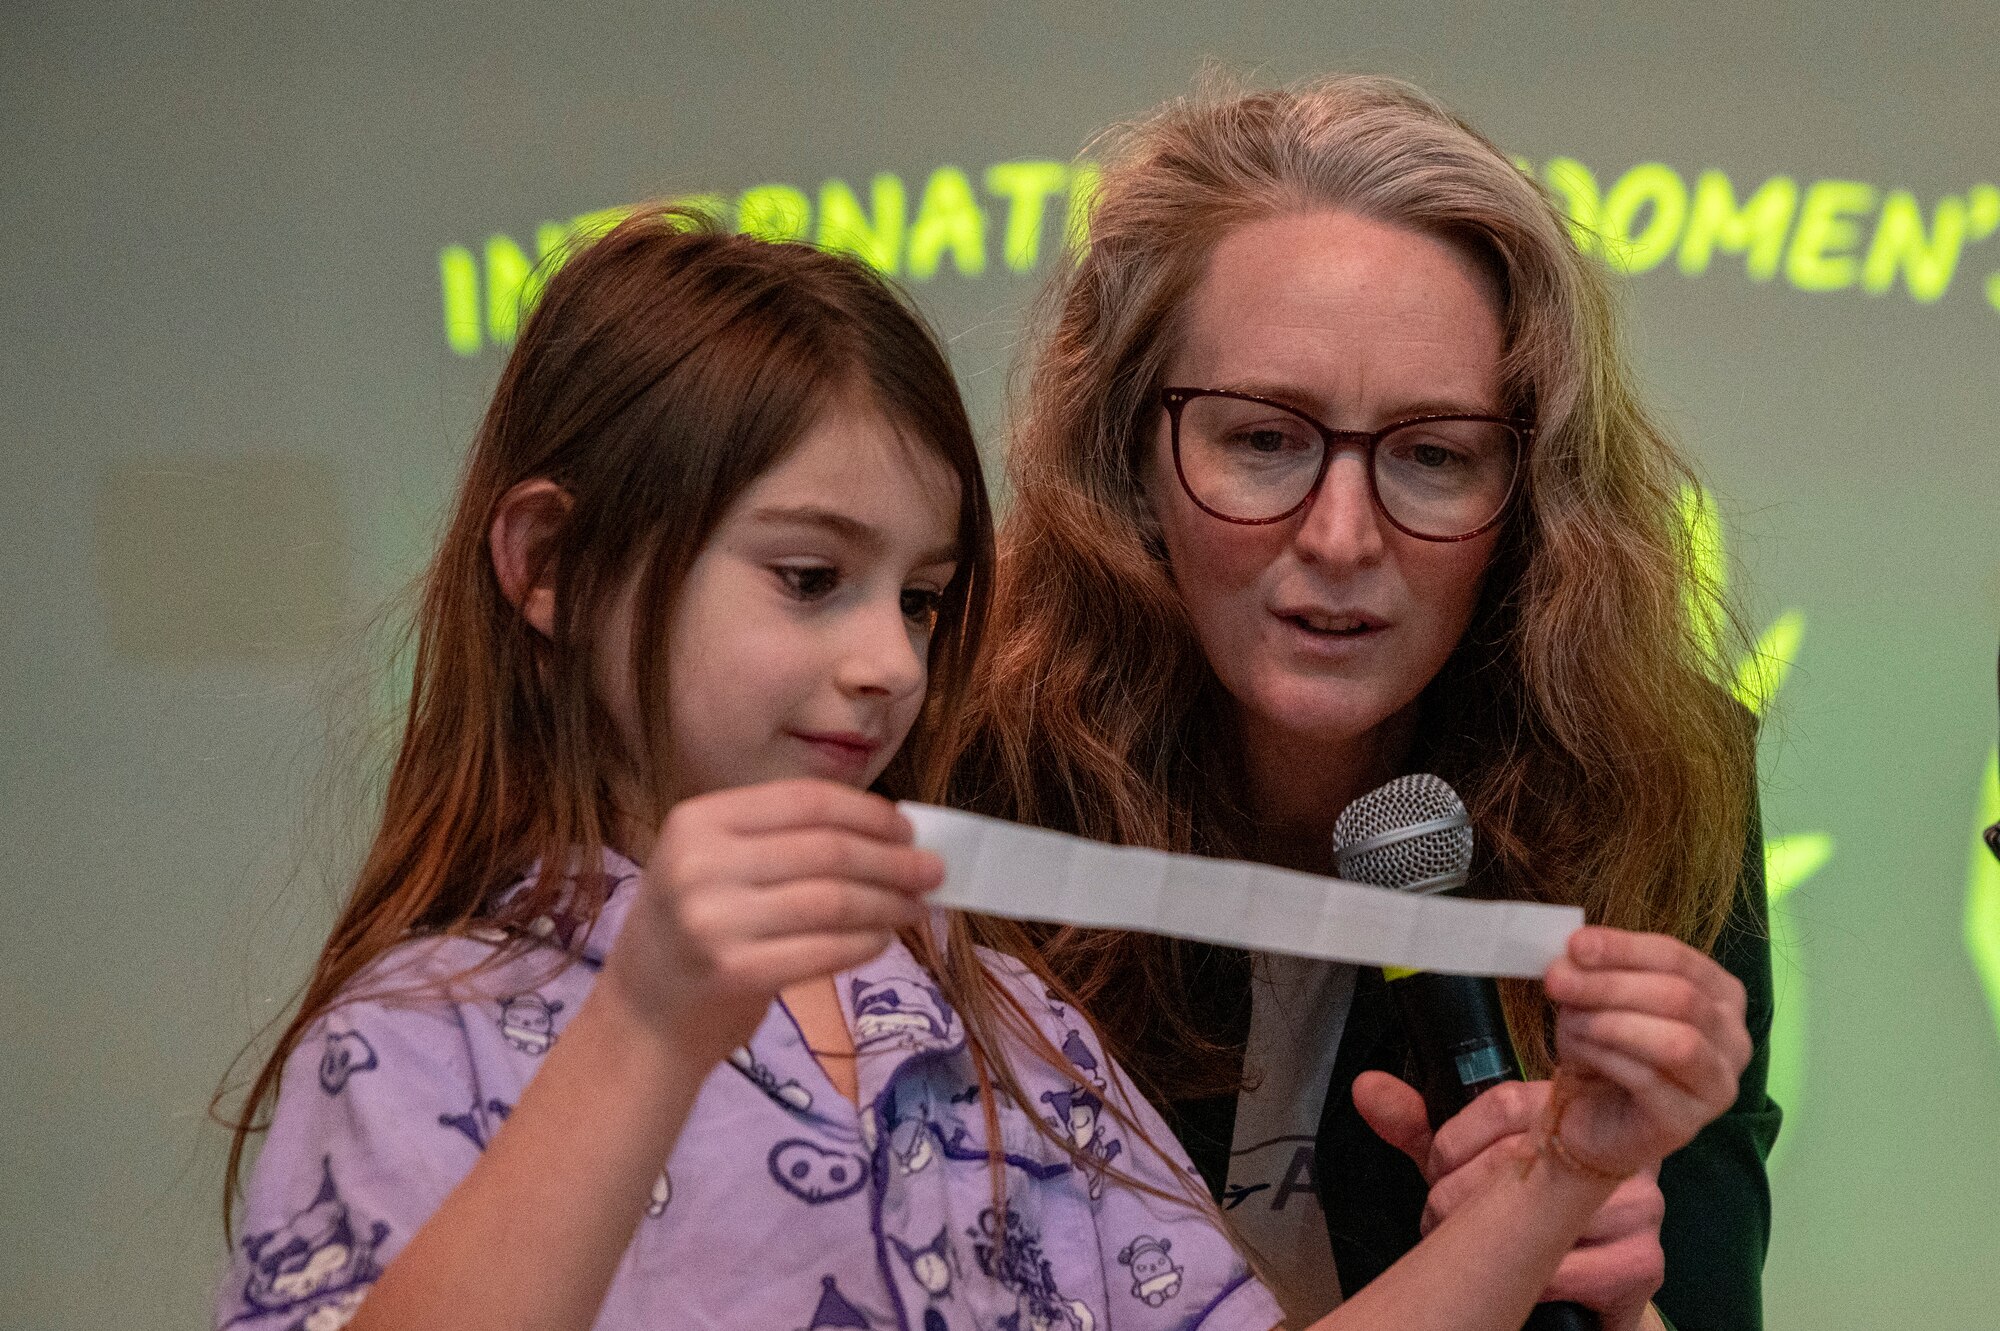 K. Emma Knowland, NASA associate research scientist, helps an Osan Elementary School student read a NASA trivia question during a Women’s History Month panel at Osan Air Base, Republic of Korea, March 8, 2024.